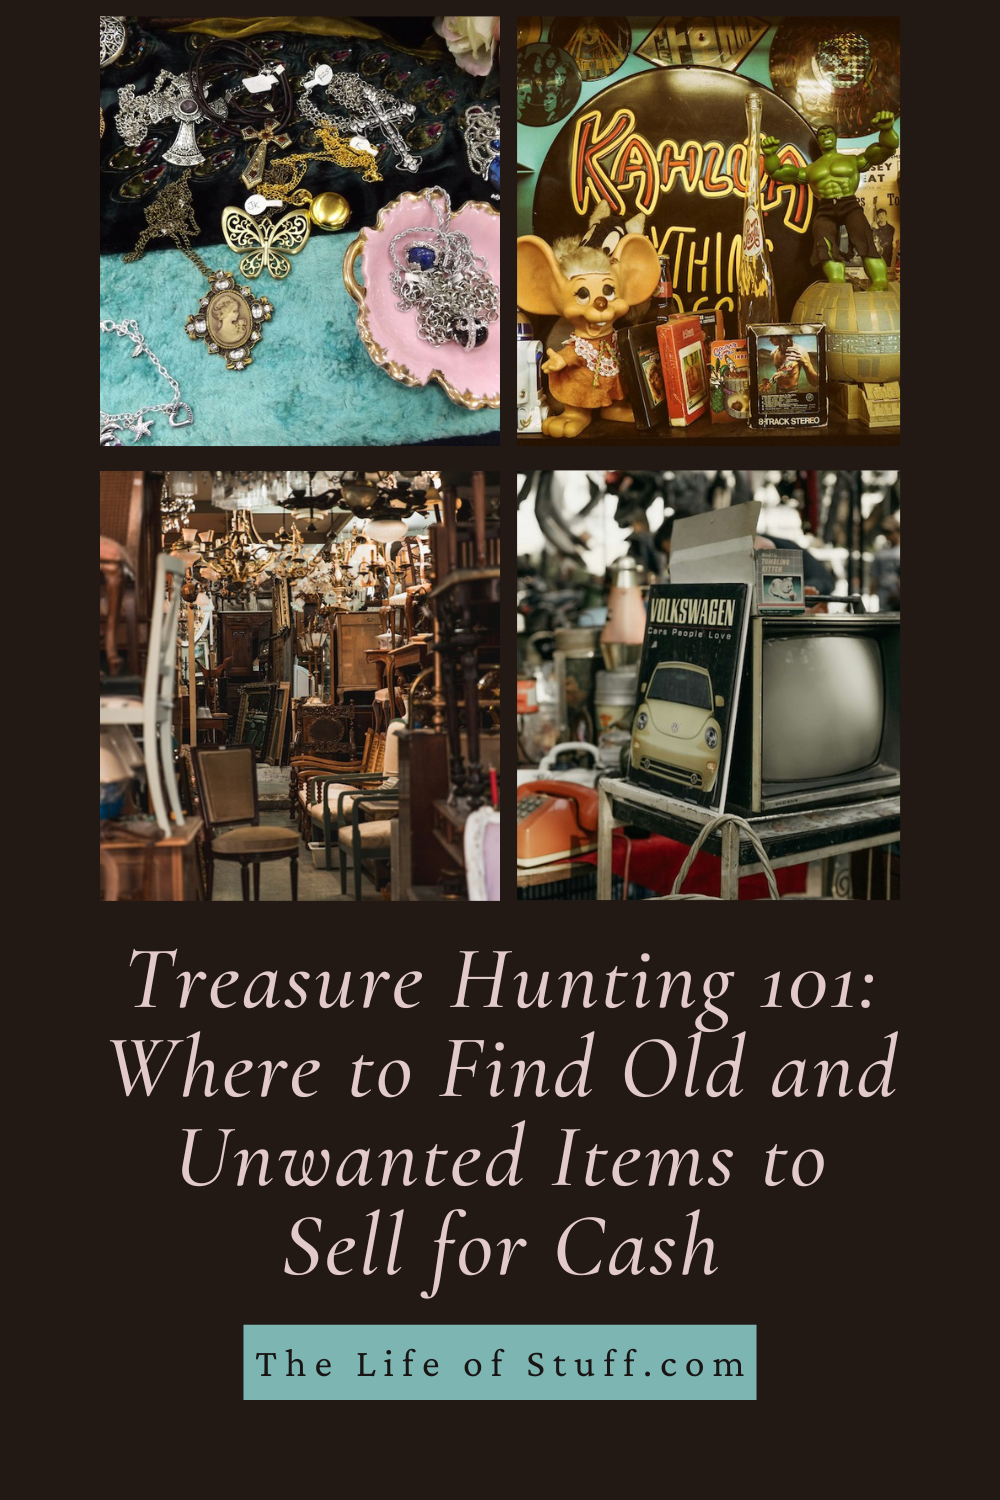 Treasure Hunting 101 - Where to Find Old and Unwanted Items to Sell for Cash - The Life of Stuff